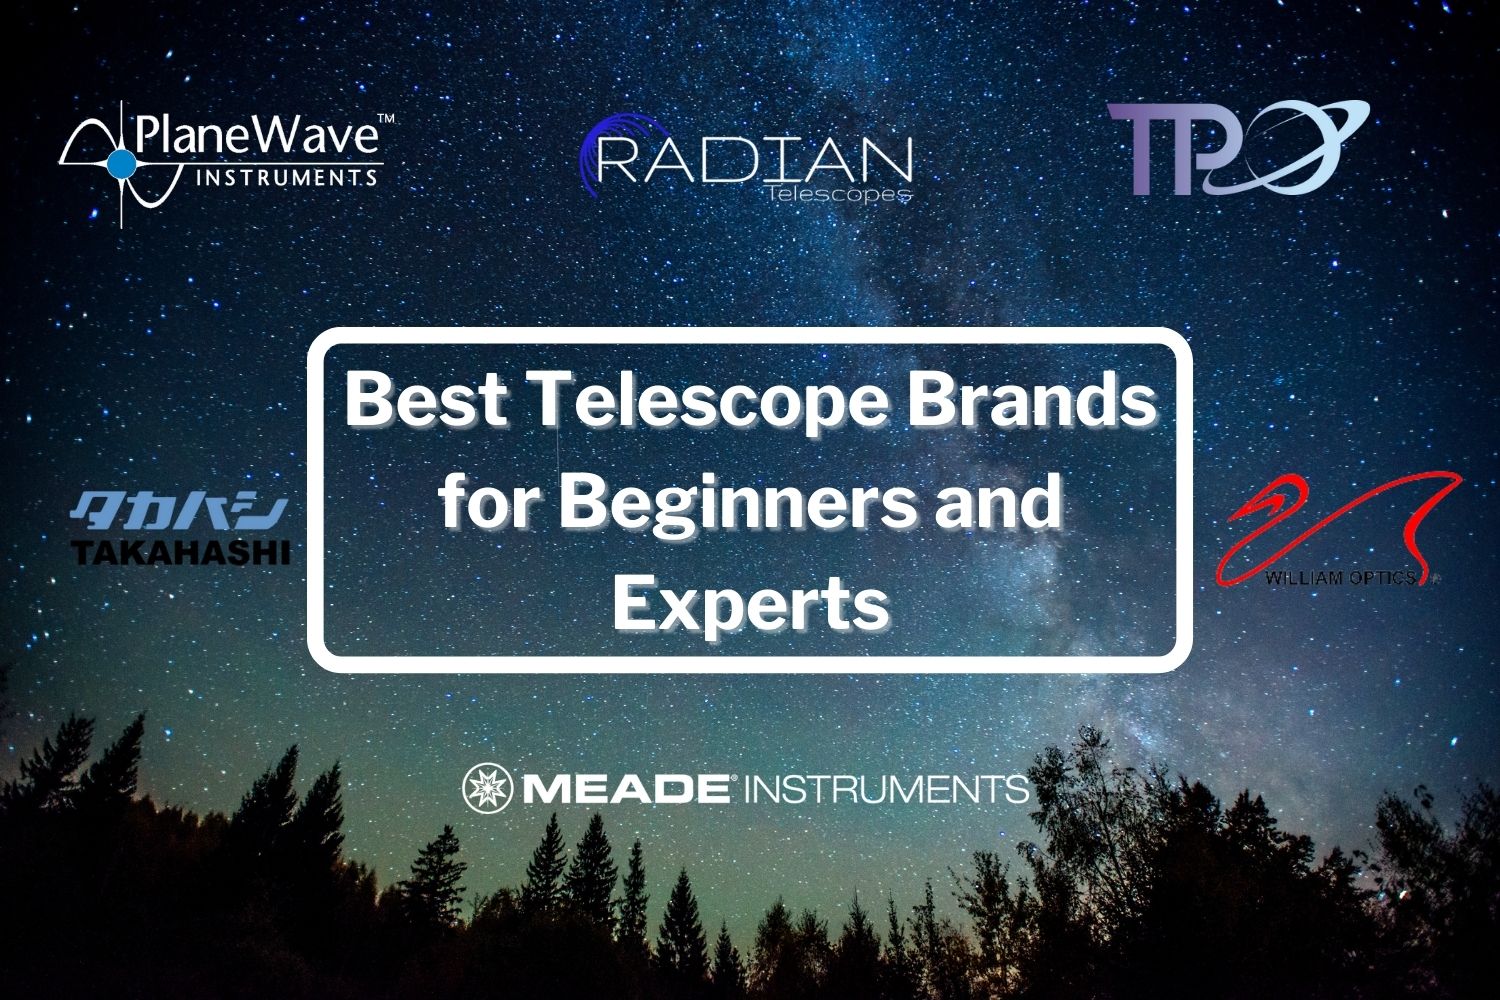 The Best Telescopes Brands for Beginners and Experts